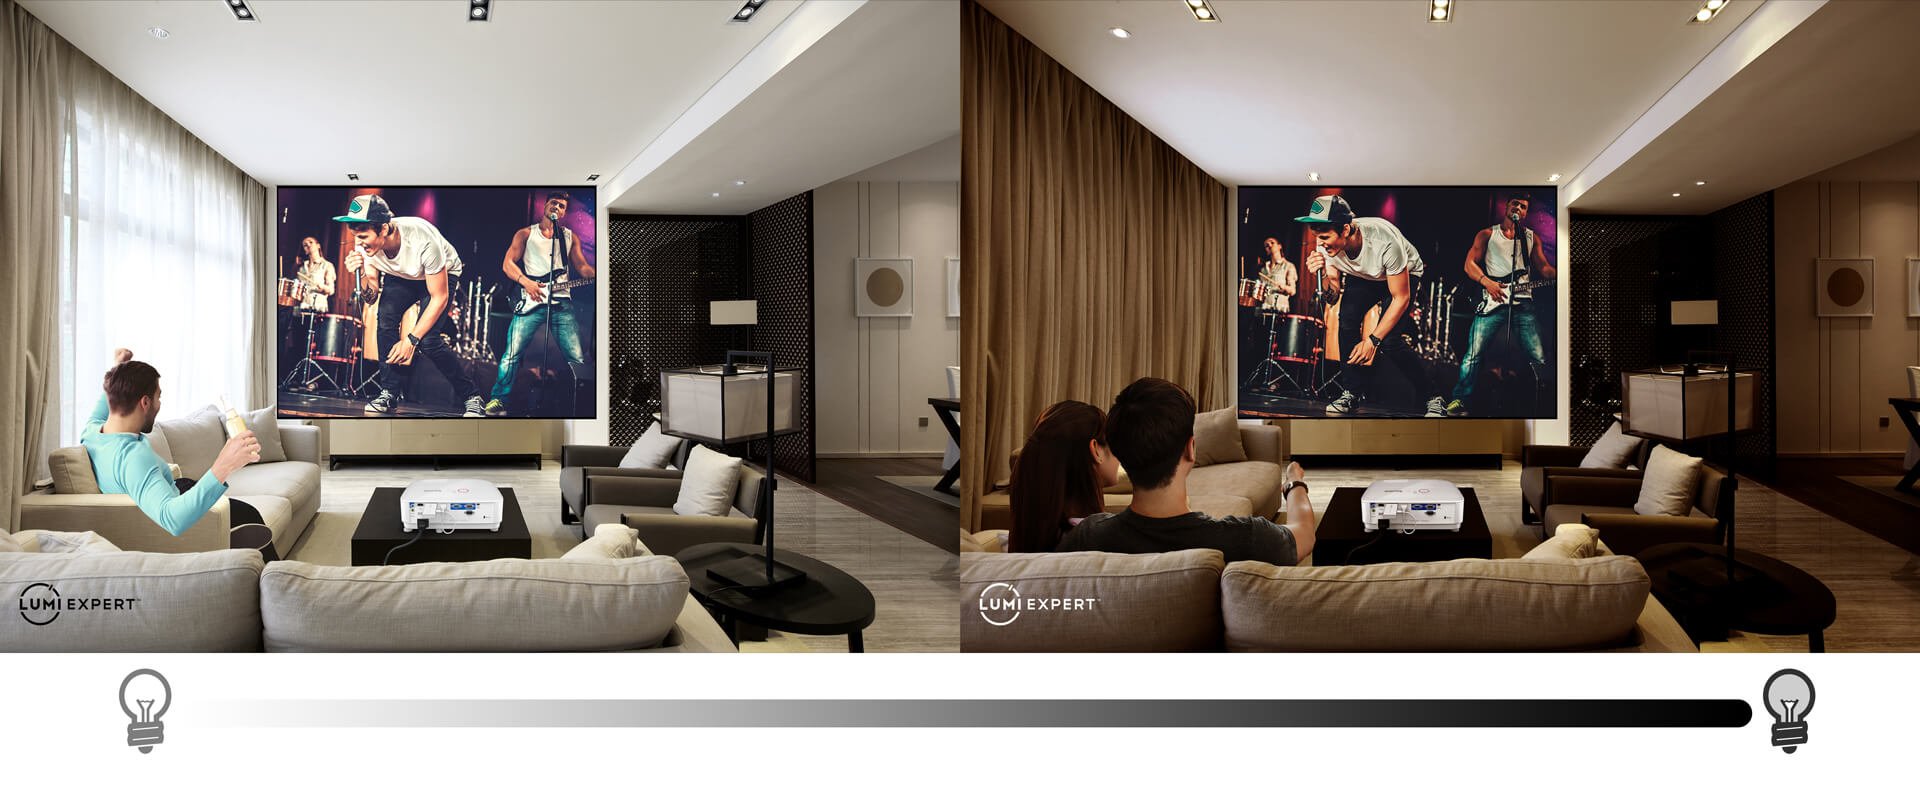 BenQ short throw projector for gaming TH671ST is equipped with LumiExpert technology, which can detect ambient light conditions in your viewing environment and automatically adjusts balanced visual brightness for maximum comfort.